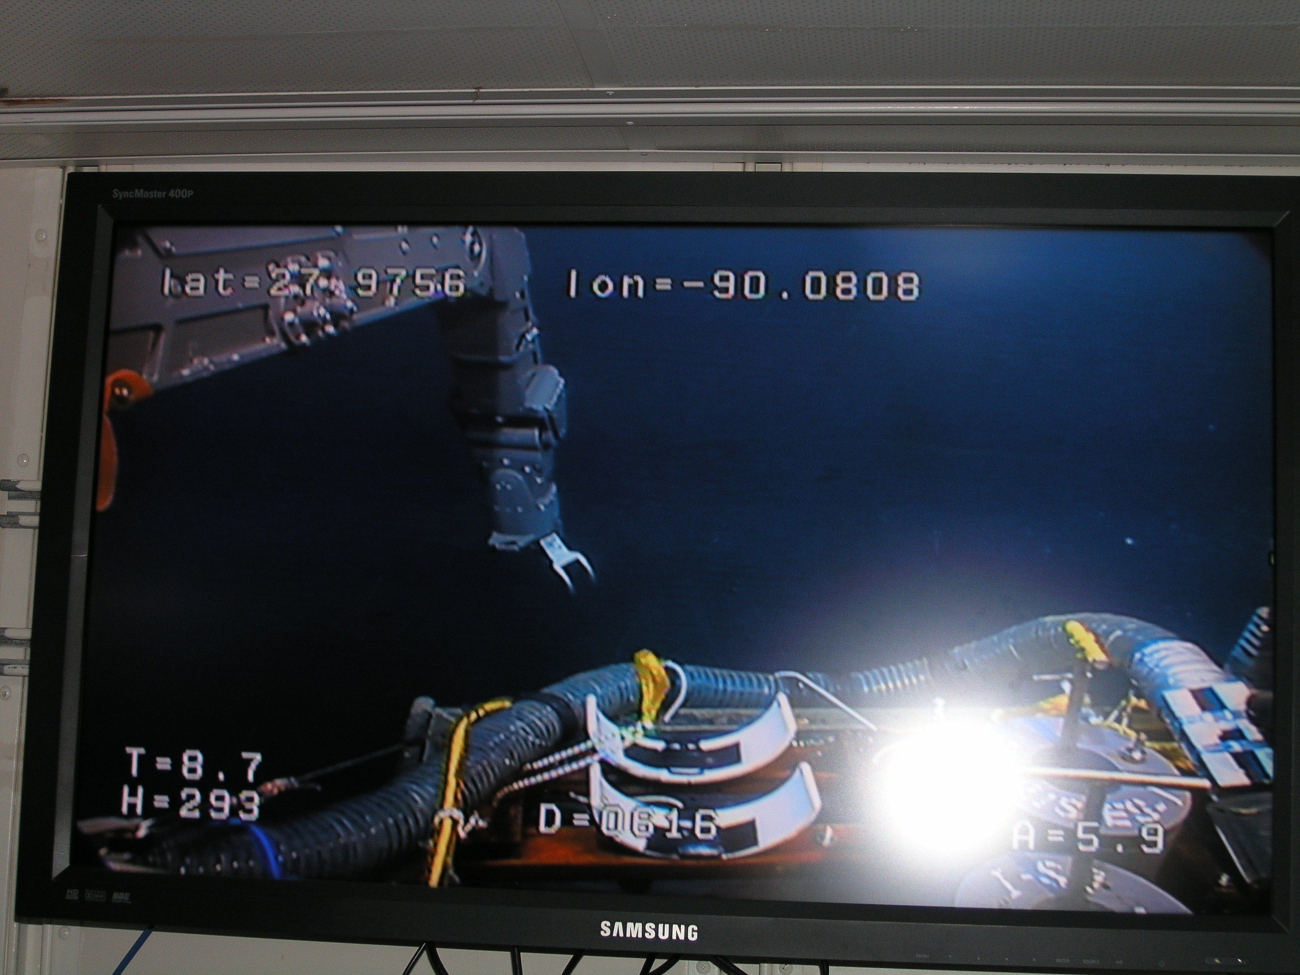 Watching the work underwater from the big screen in the laboratory